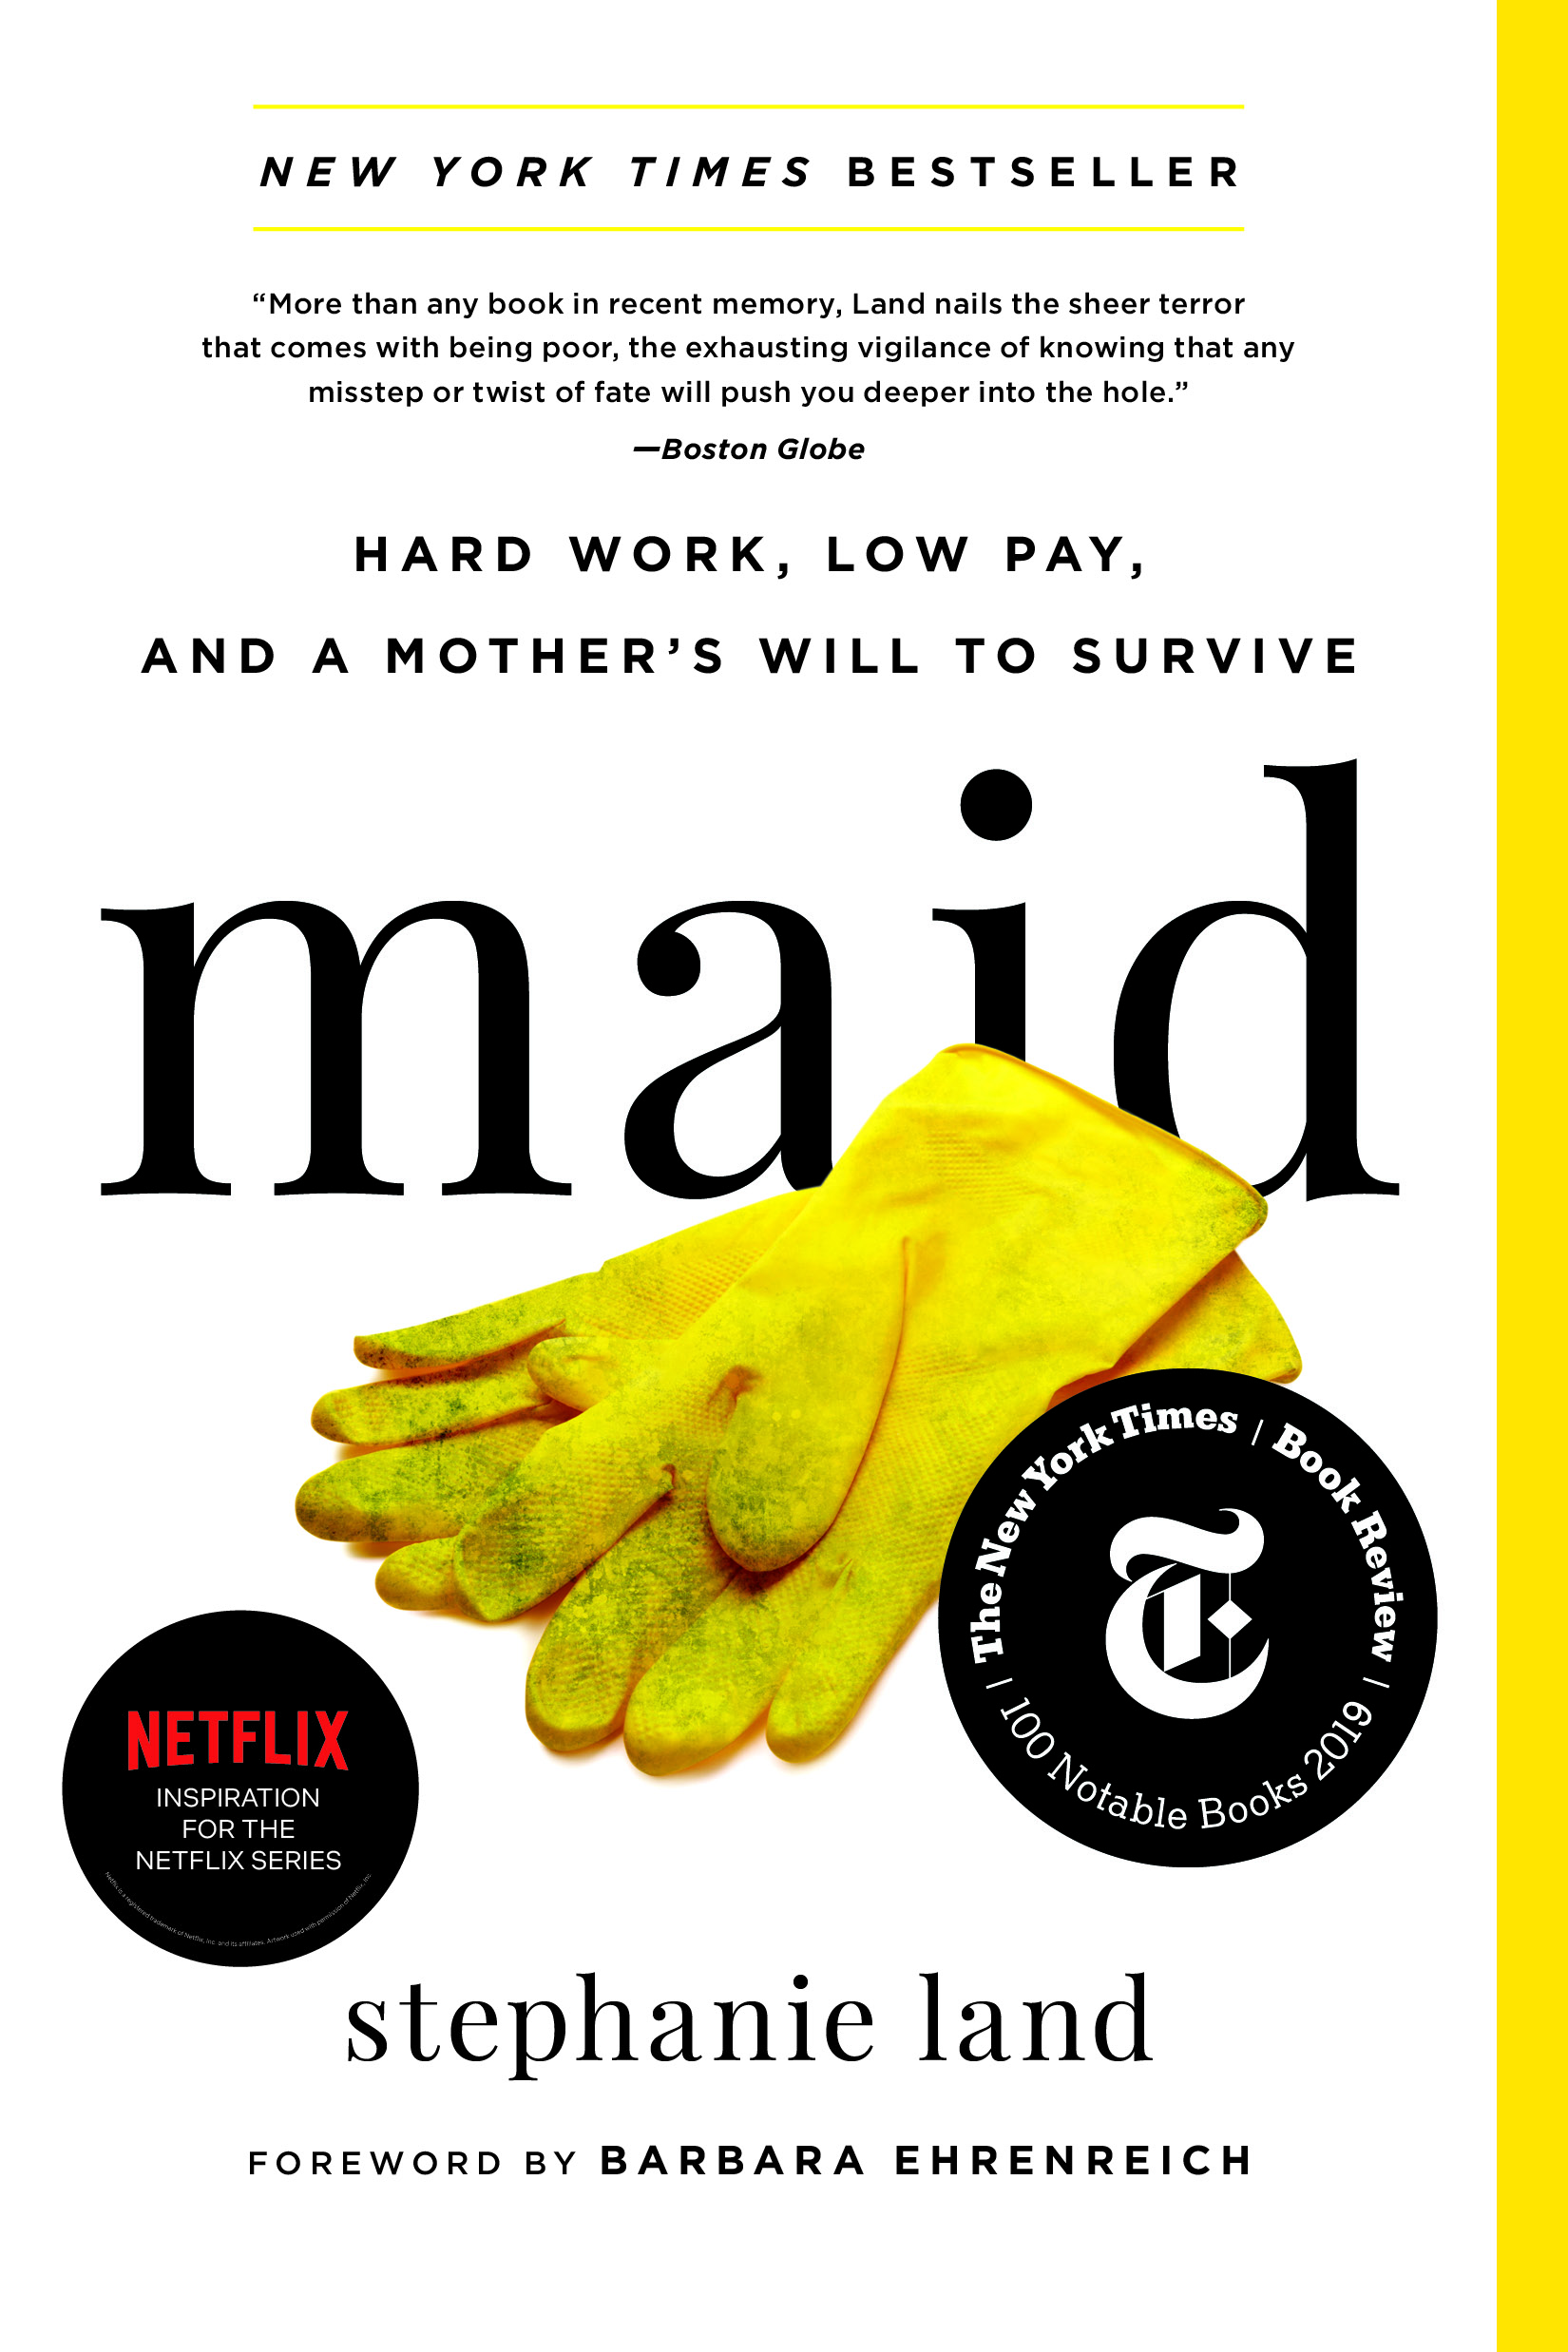 Cover of the book "Maid" by Stephanie Land.